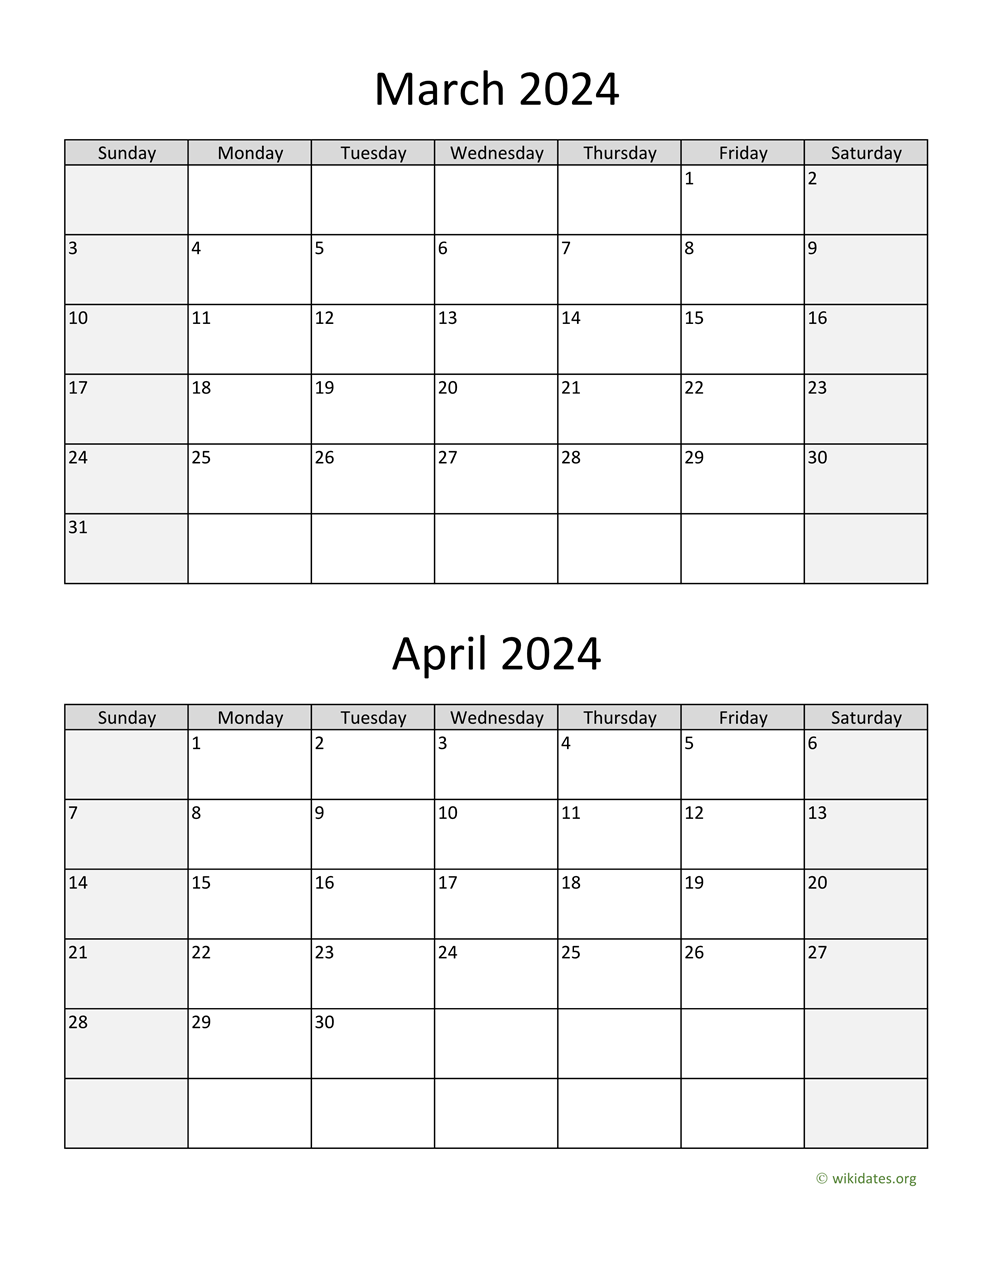 March And April 2024 Calendar | Wikidates for Calendar March And April 2024 Printable